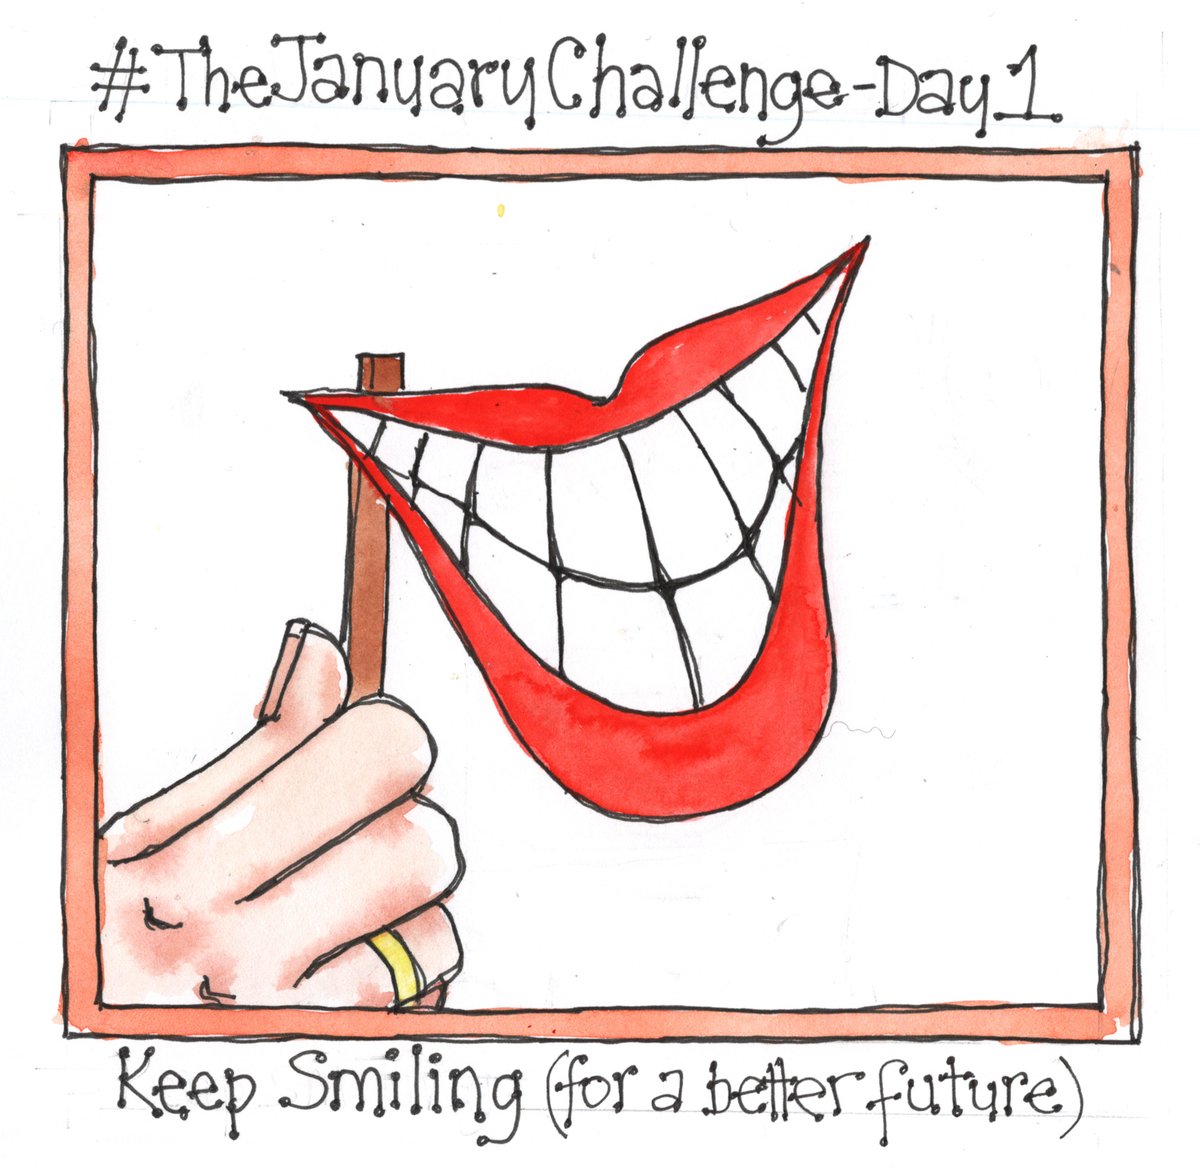 It's time to take part in TheJanuaryChallenge2023, a sketch a day from a prompt sent by #64millionartists.
Today's task is to make a 'better future'. So keep smiling!

#TheJanuaryChallenge #Day1 #Smile  #KeepSmiling #SketchaDay